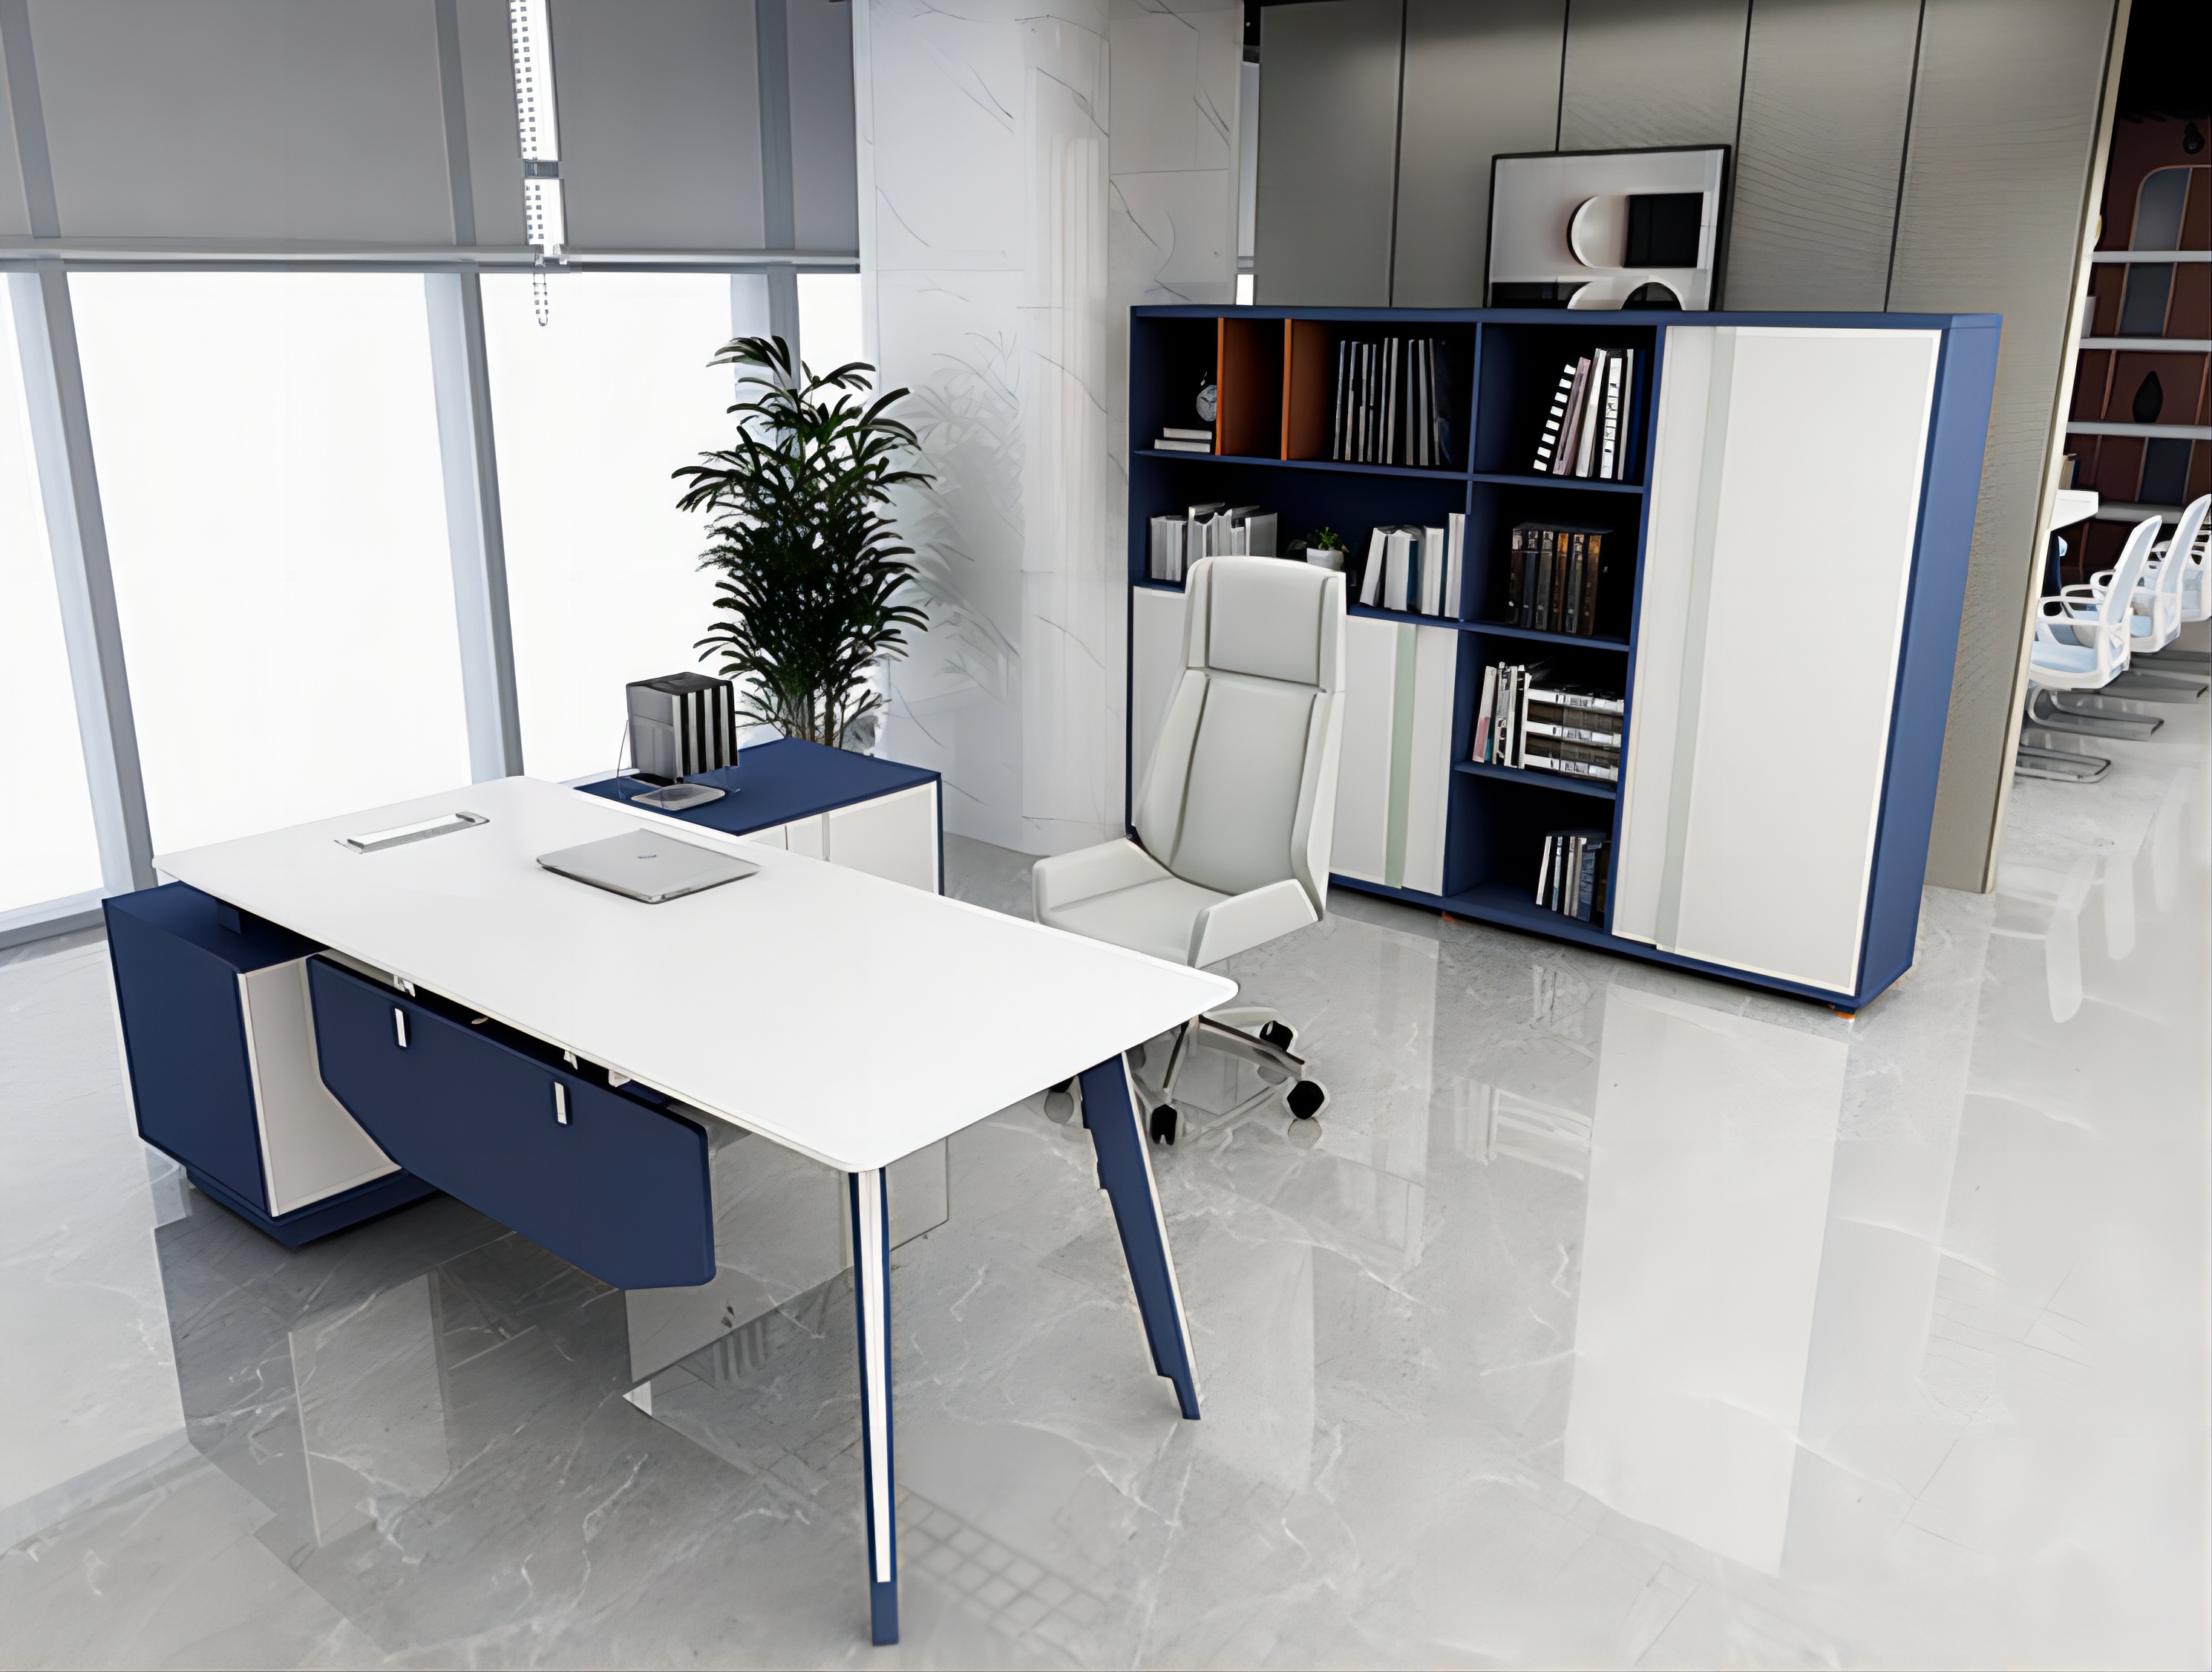 Cost-effective|Executive Manager's Desk!